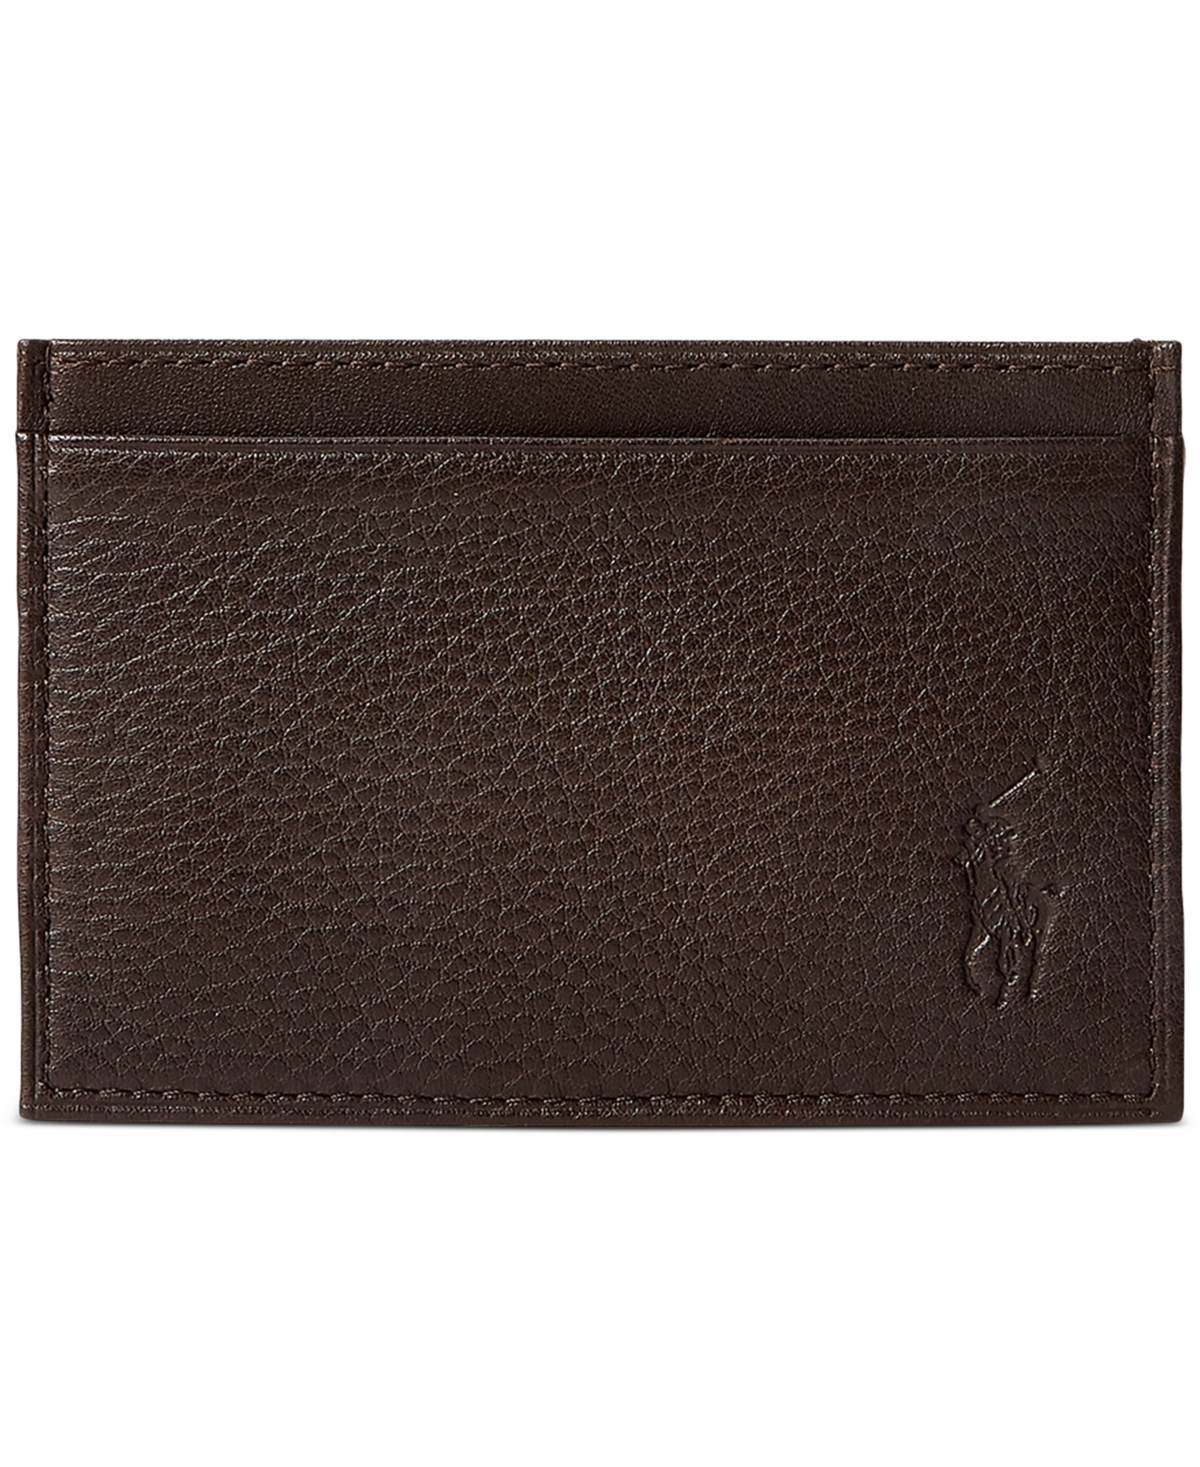 Men's Pebbled Leather Card Case - Brown